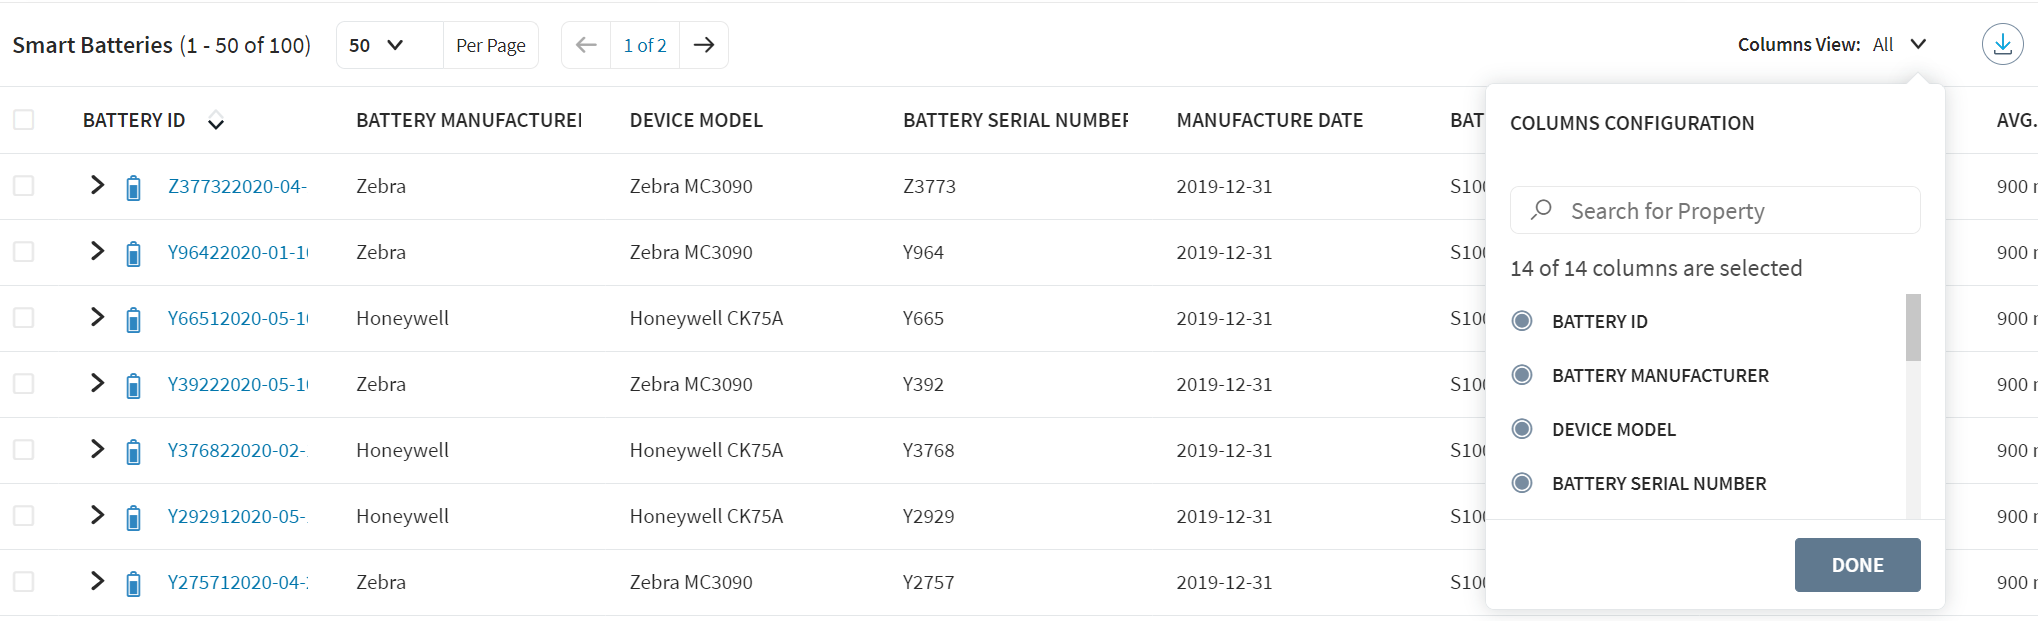 Column selection for the Smart Batteries table